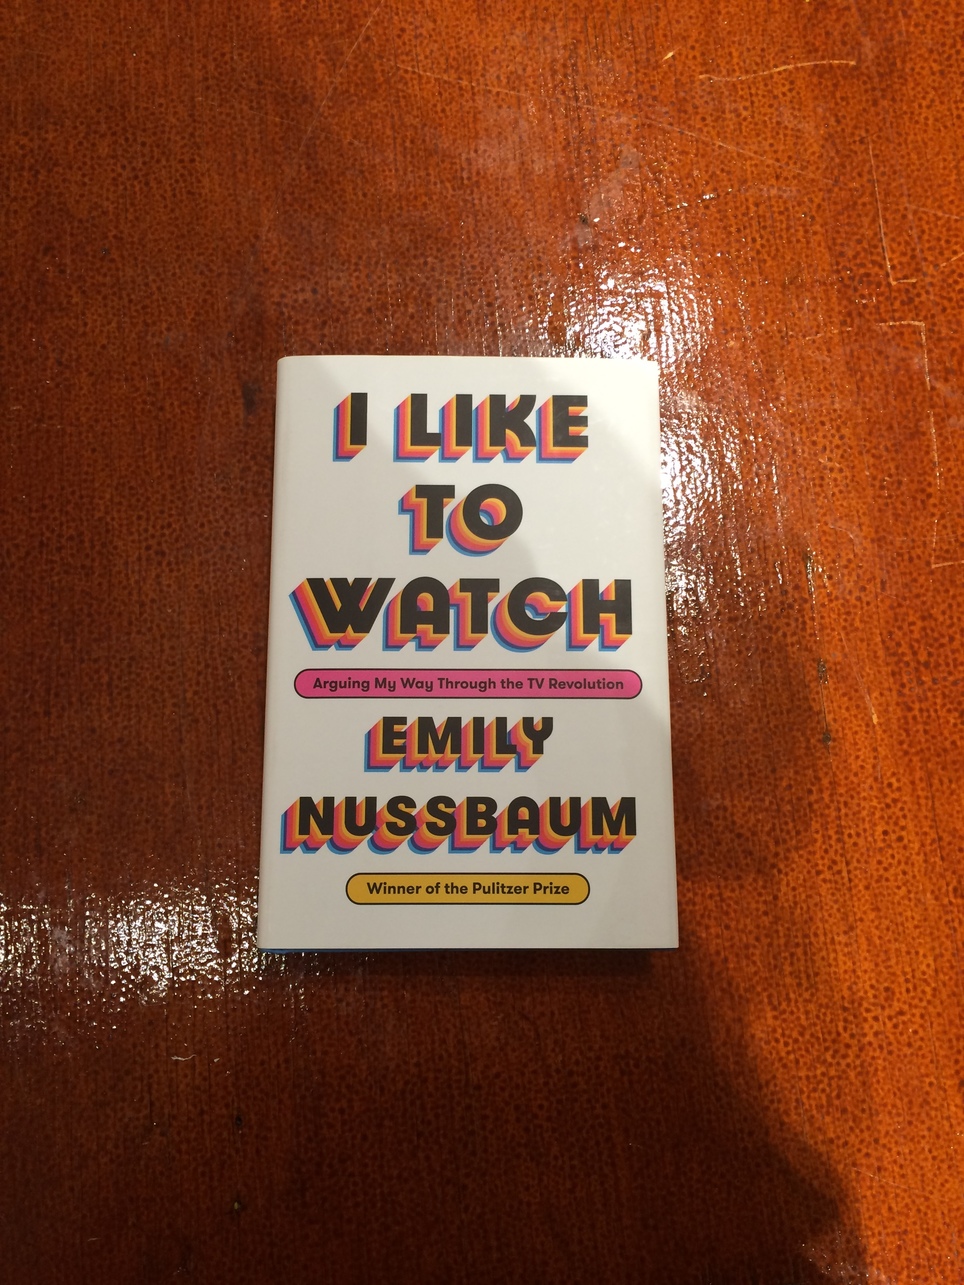 "I really am a television fan" - True Reads Bookclub, discussing I like to watch by Emily Nussbaum.